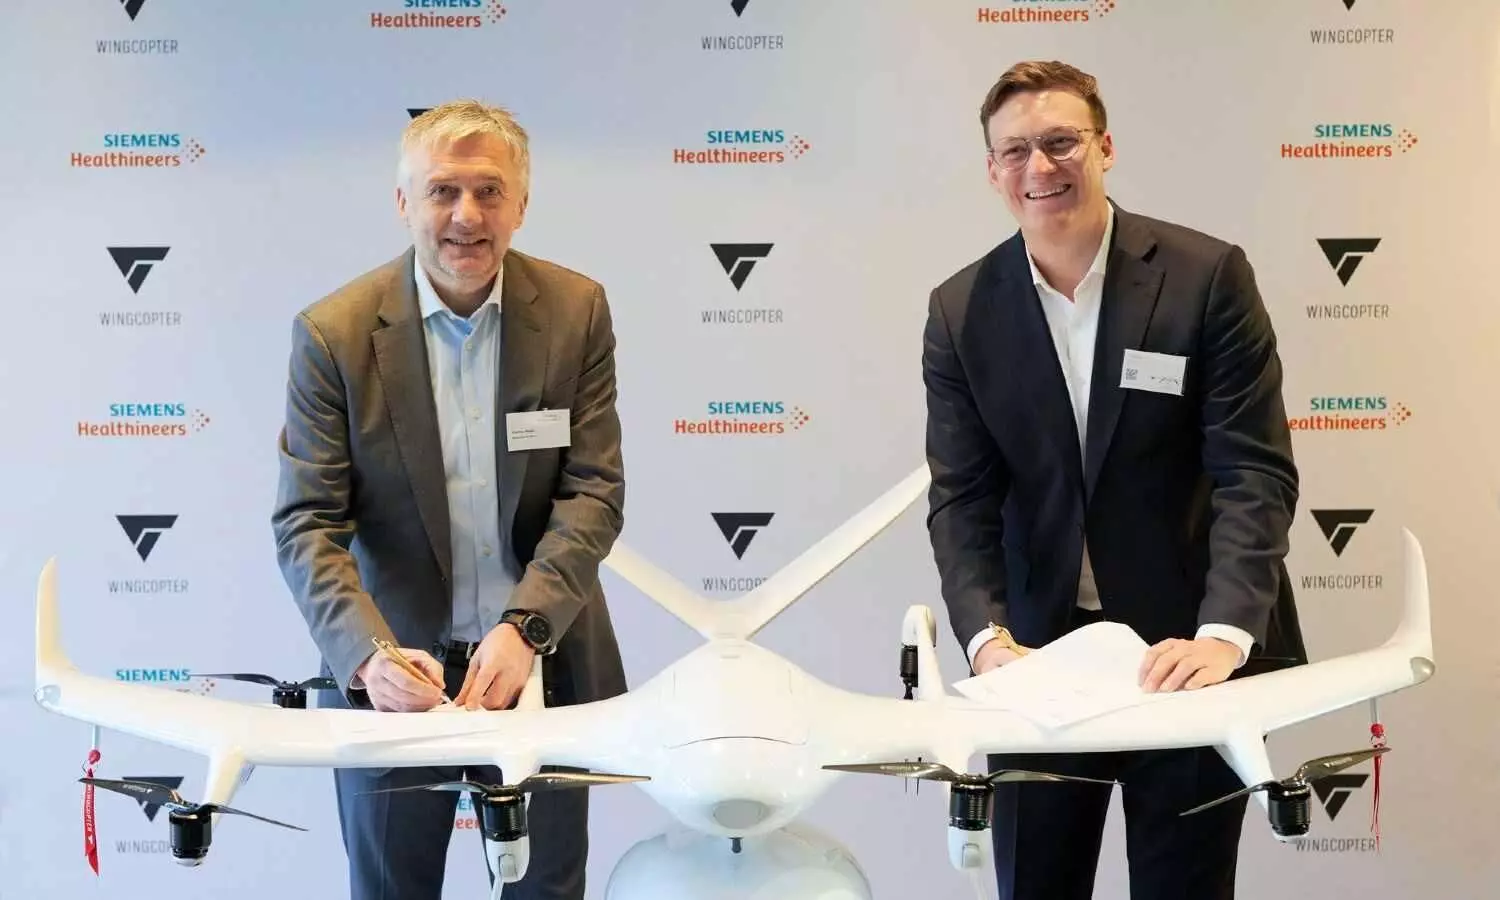 Wingcopter partners with Siemens Healthineers to deliver lab samples